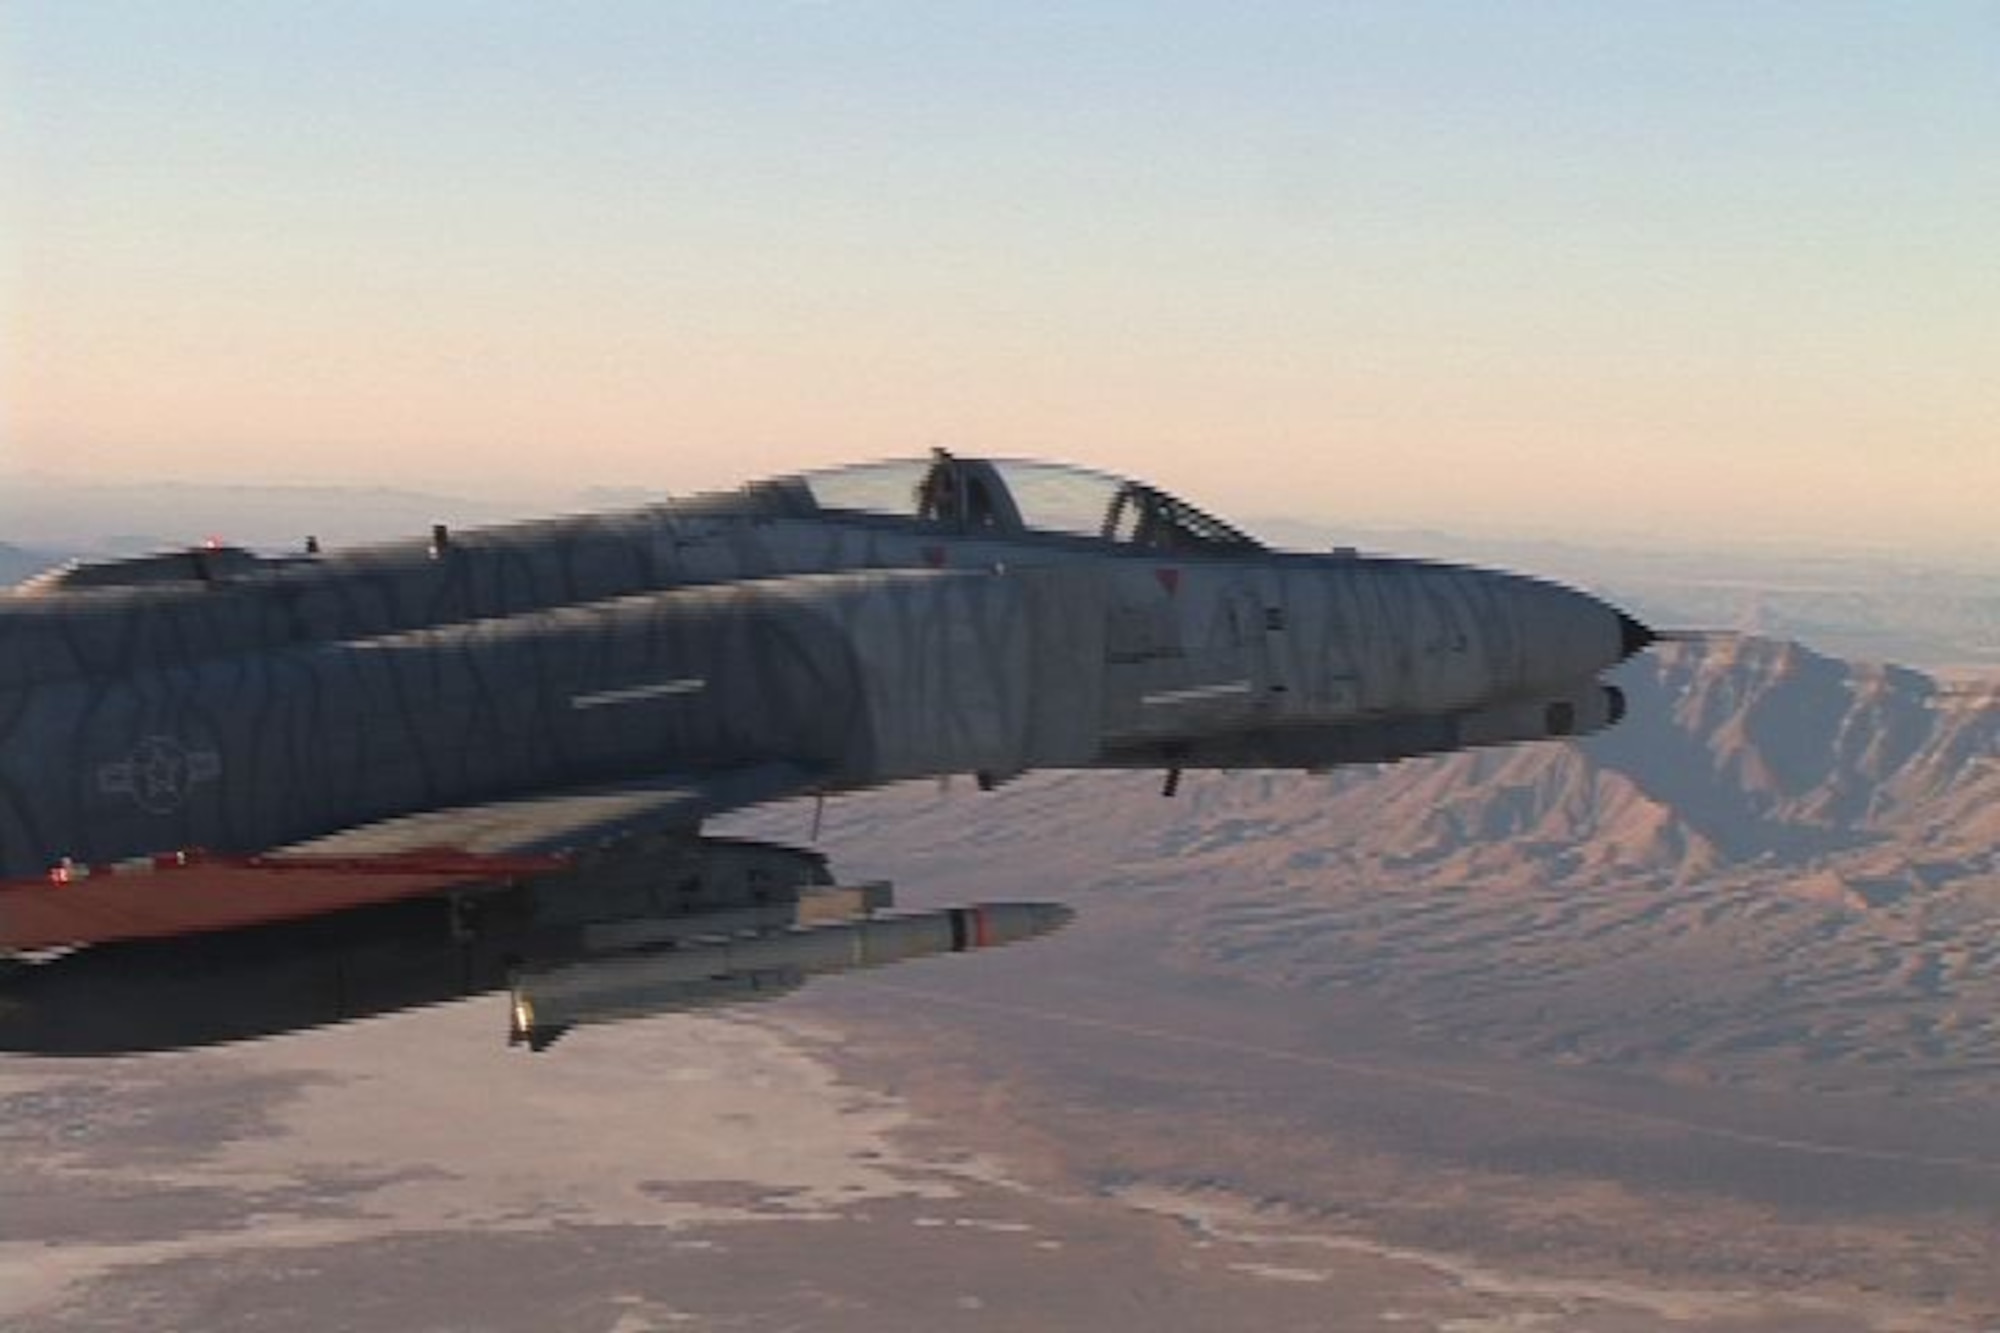 The QF-4 drone prepares to launch a missile over White Sands Missile Range, N.M. on Jan. 09, 2008. This was the first air to ground missile fired off the unmanned drone. (U.S. Air Force photo courtesy of Det 1, 82 ATRS)